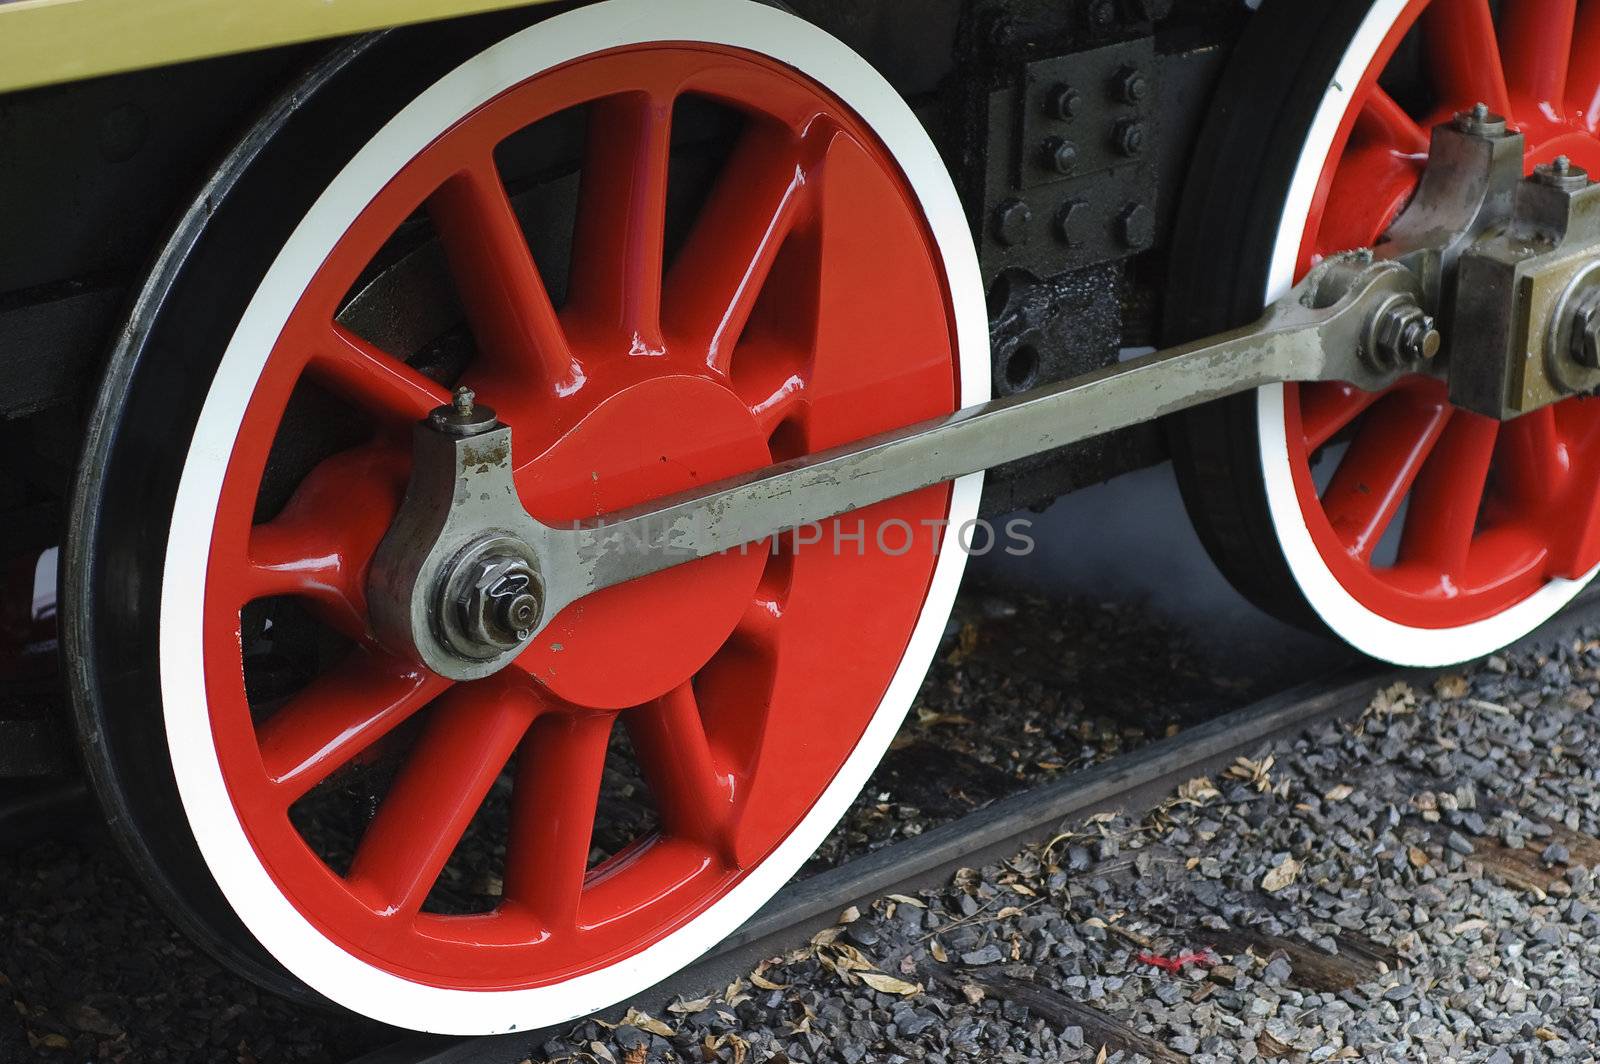 Horizontal image of two red steam train wheels